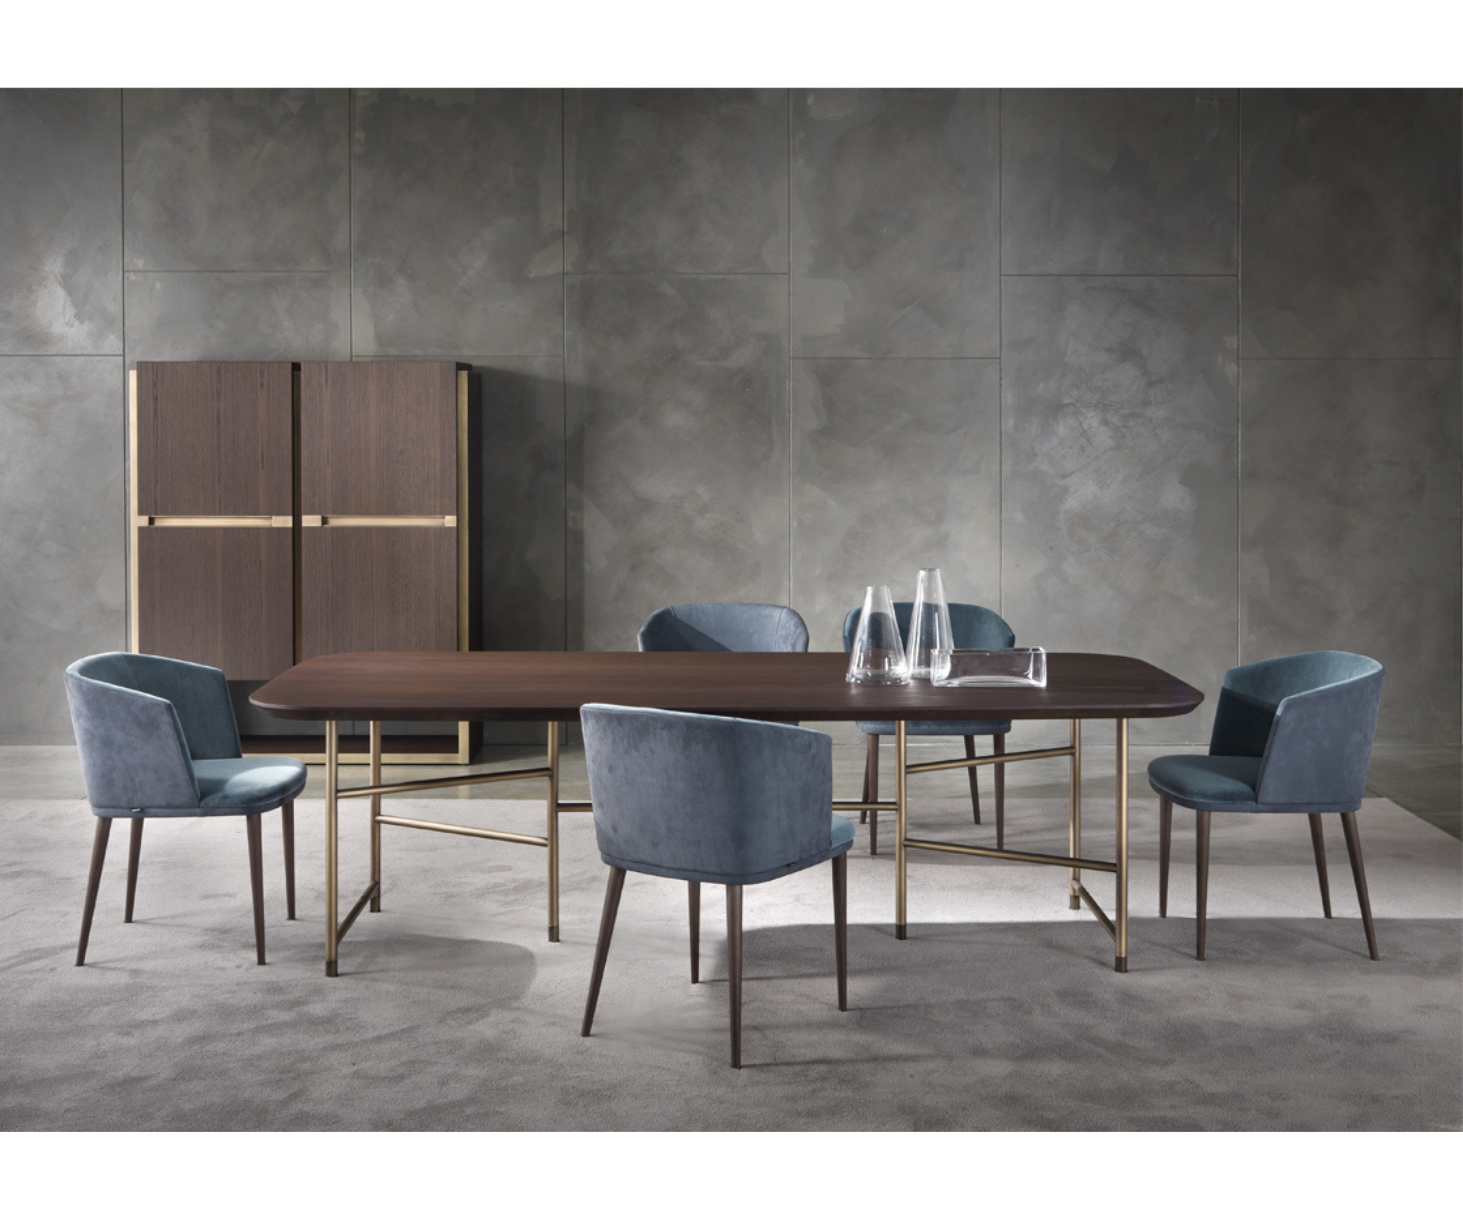 Kyoto Dining Table by Marelli